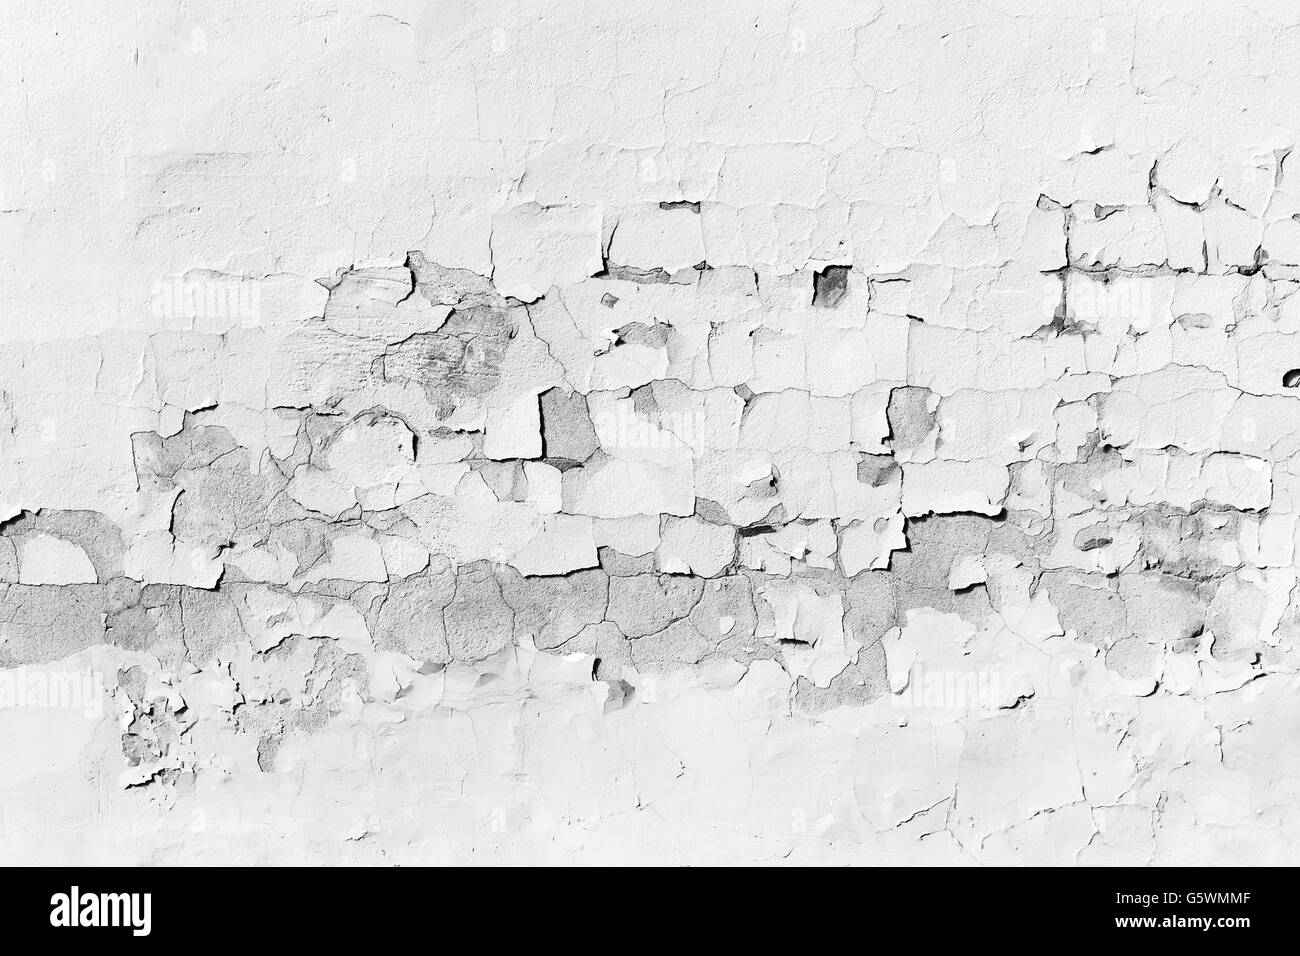 Background texture of old concrete wall with peeling layer of white paint Stock Photo